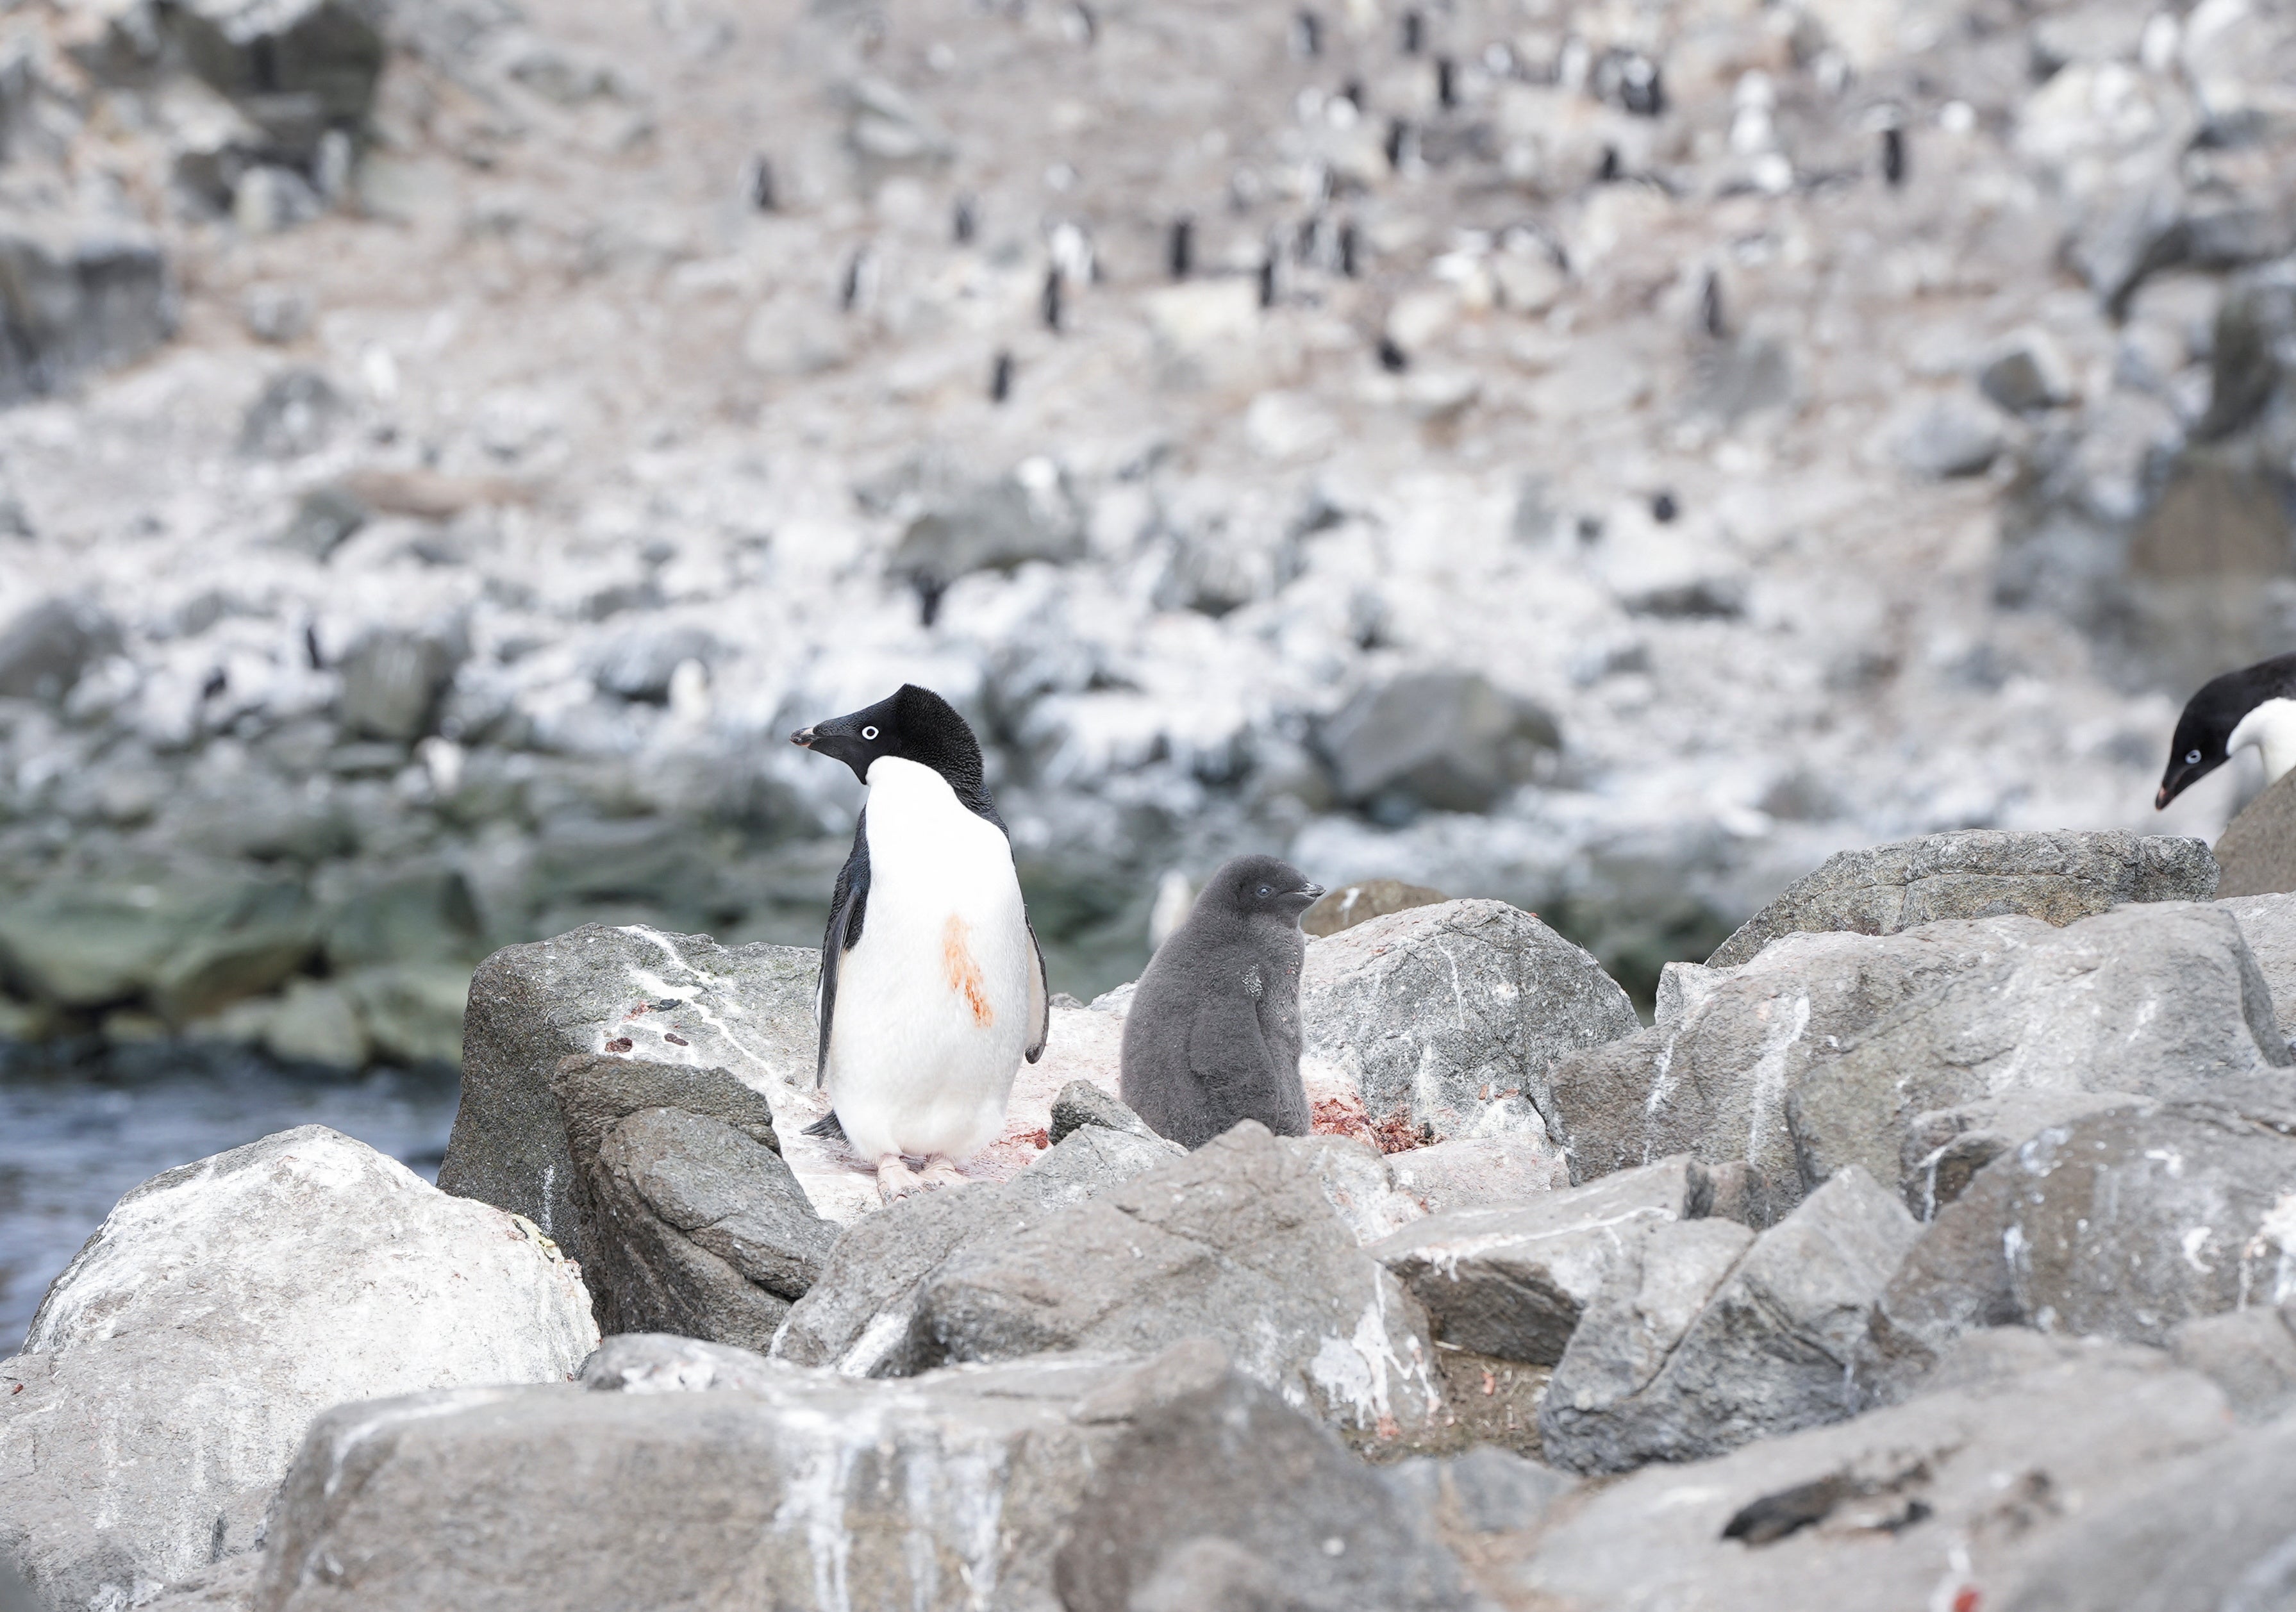 A penguin colony on the eastern side of the Antarctic peninsula